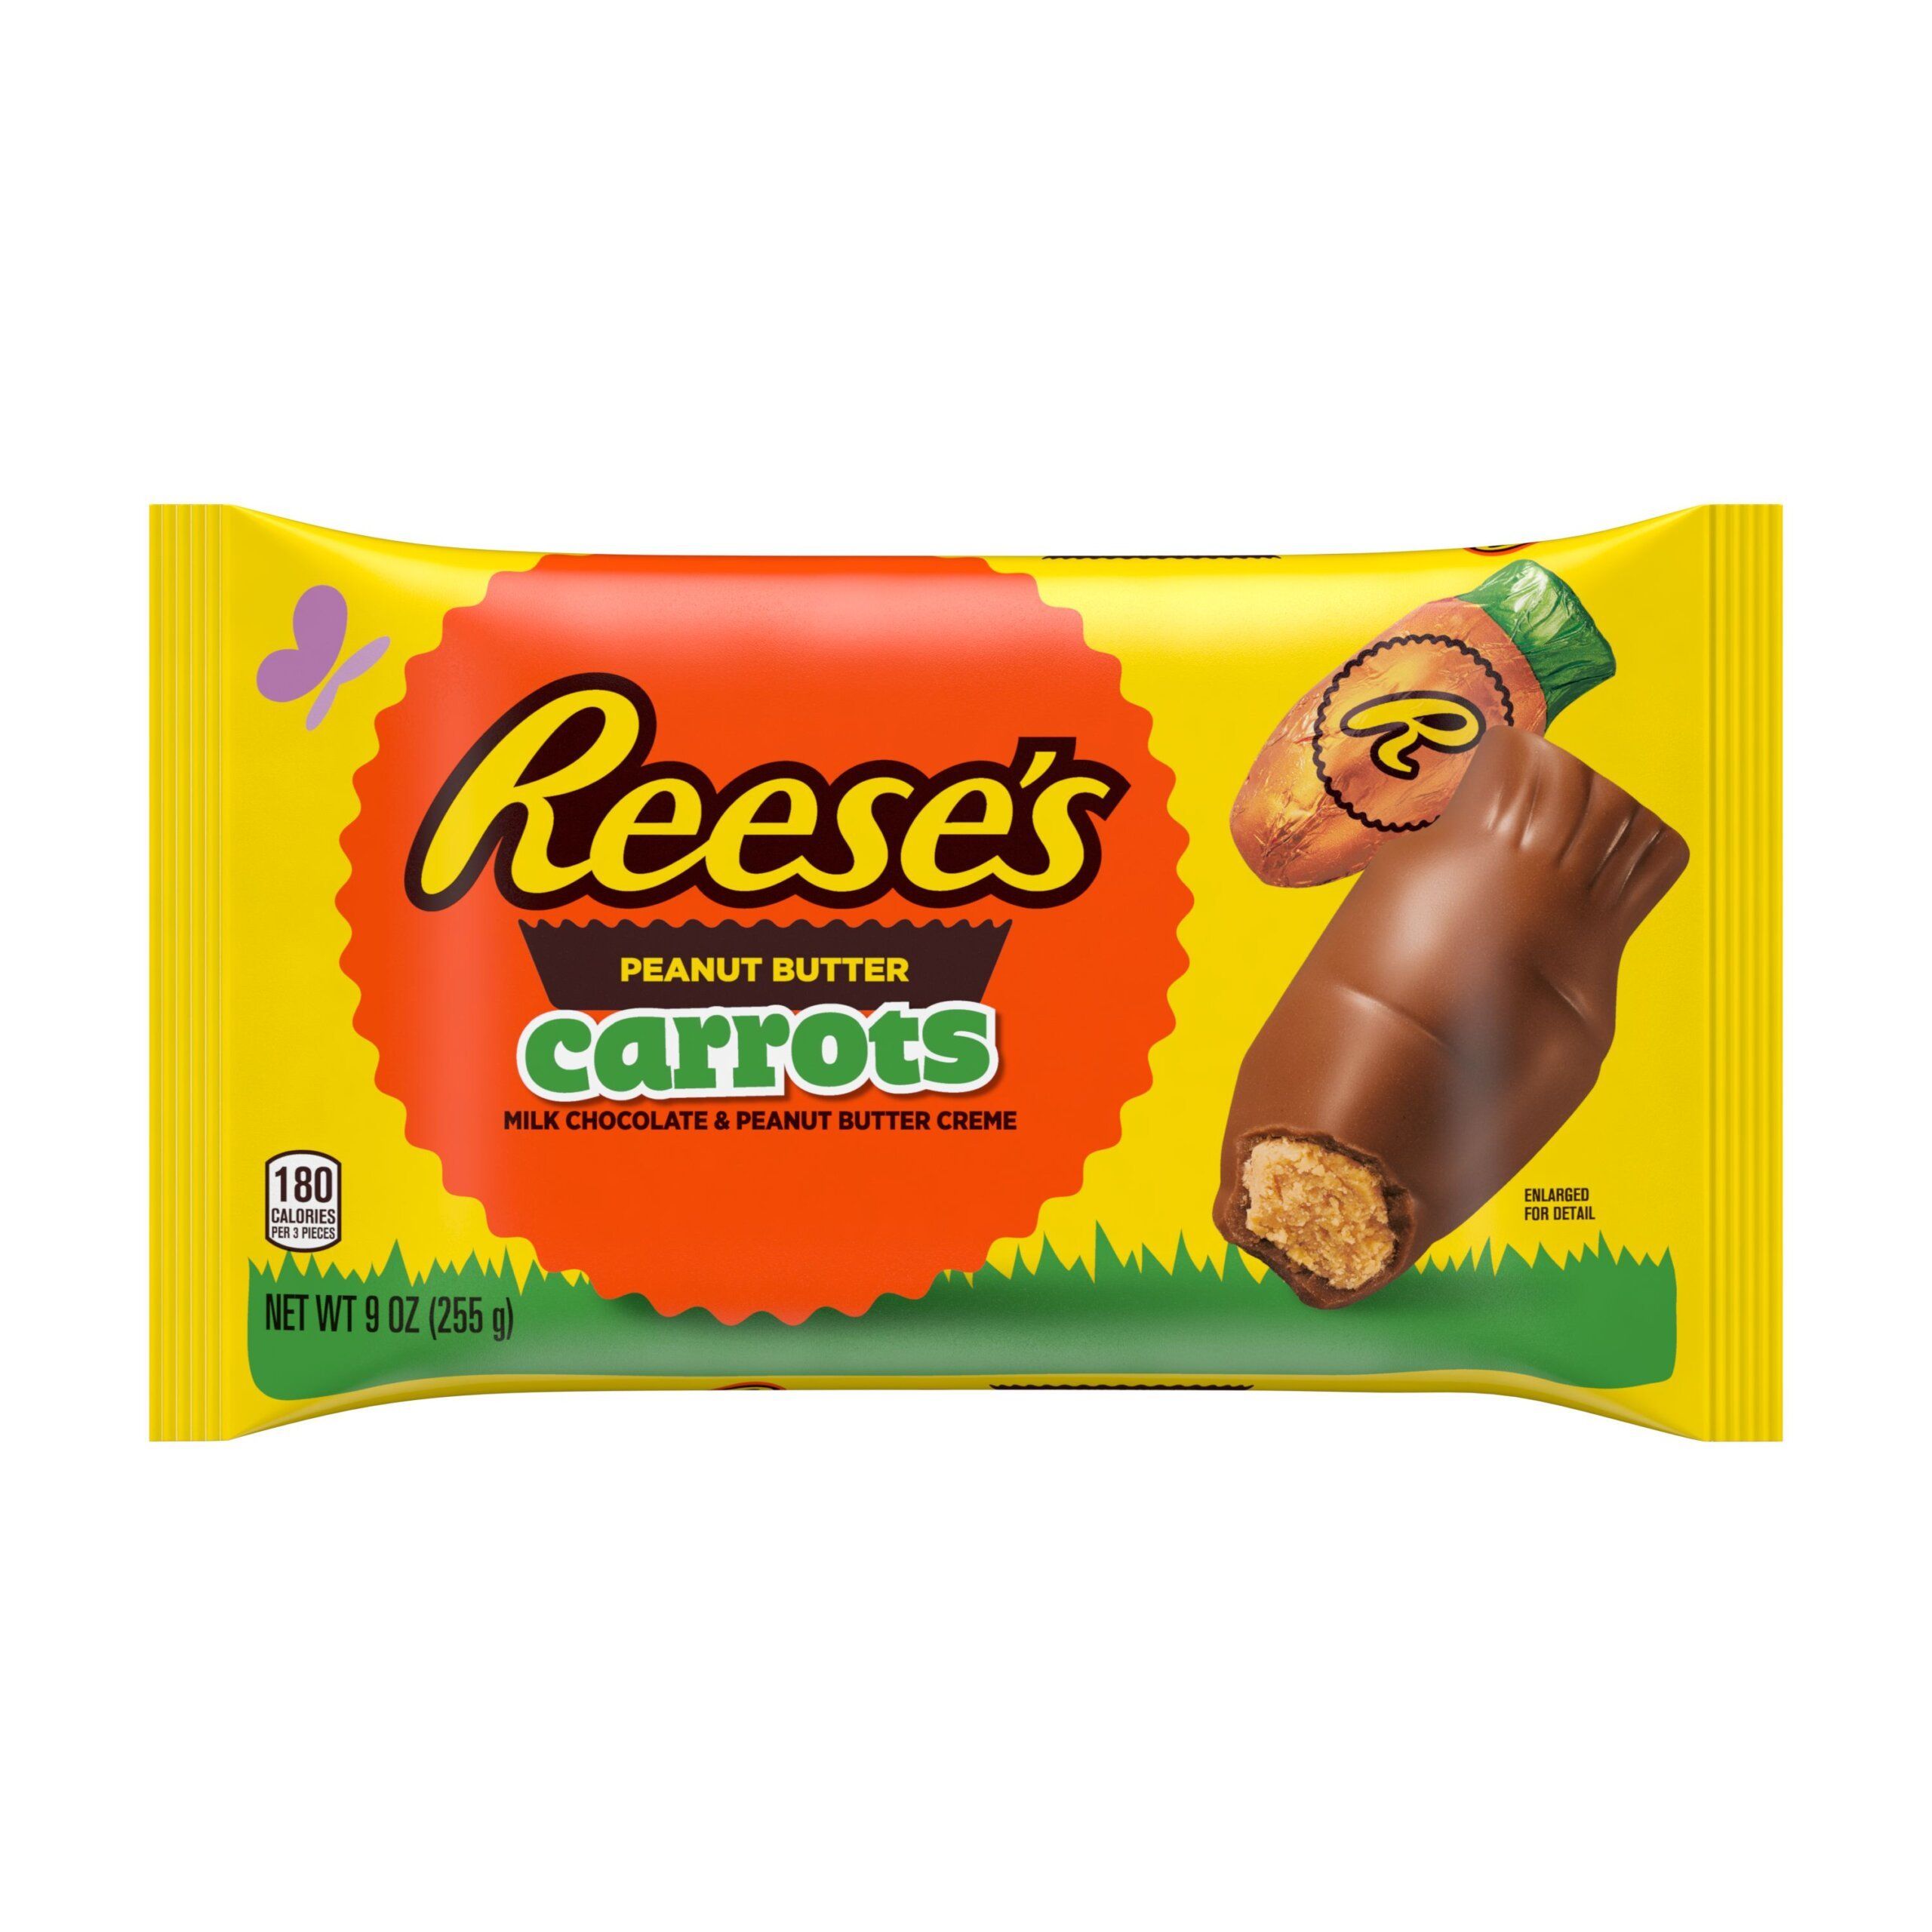 Reese’s Peanut Butter Carrots Are Taking Over Eggs This Easter And We’re Not Mad About It